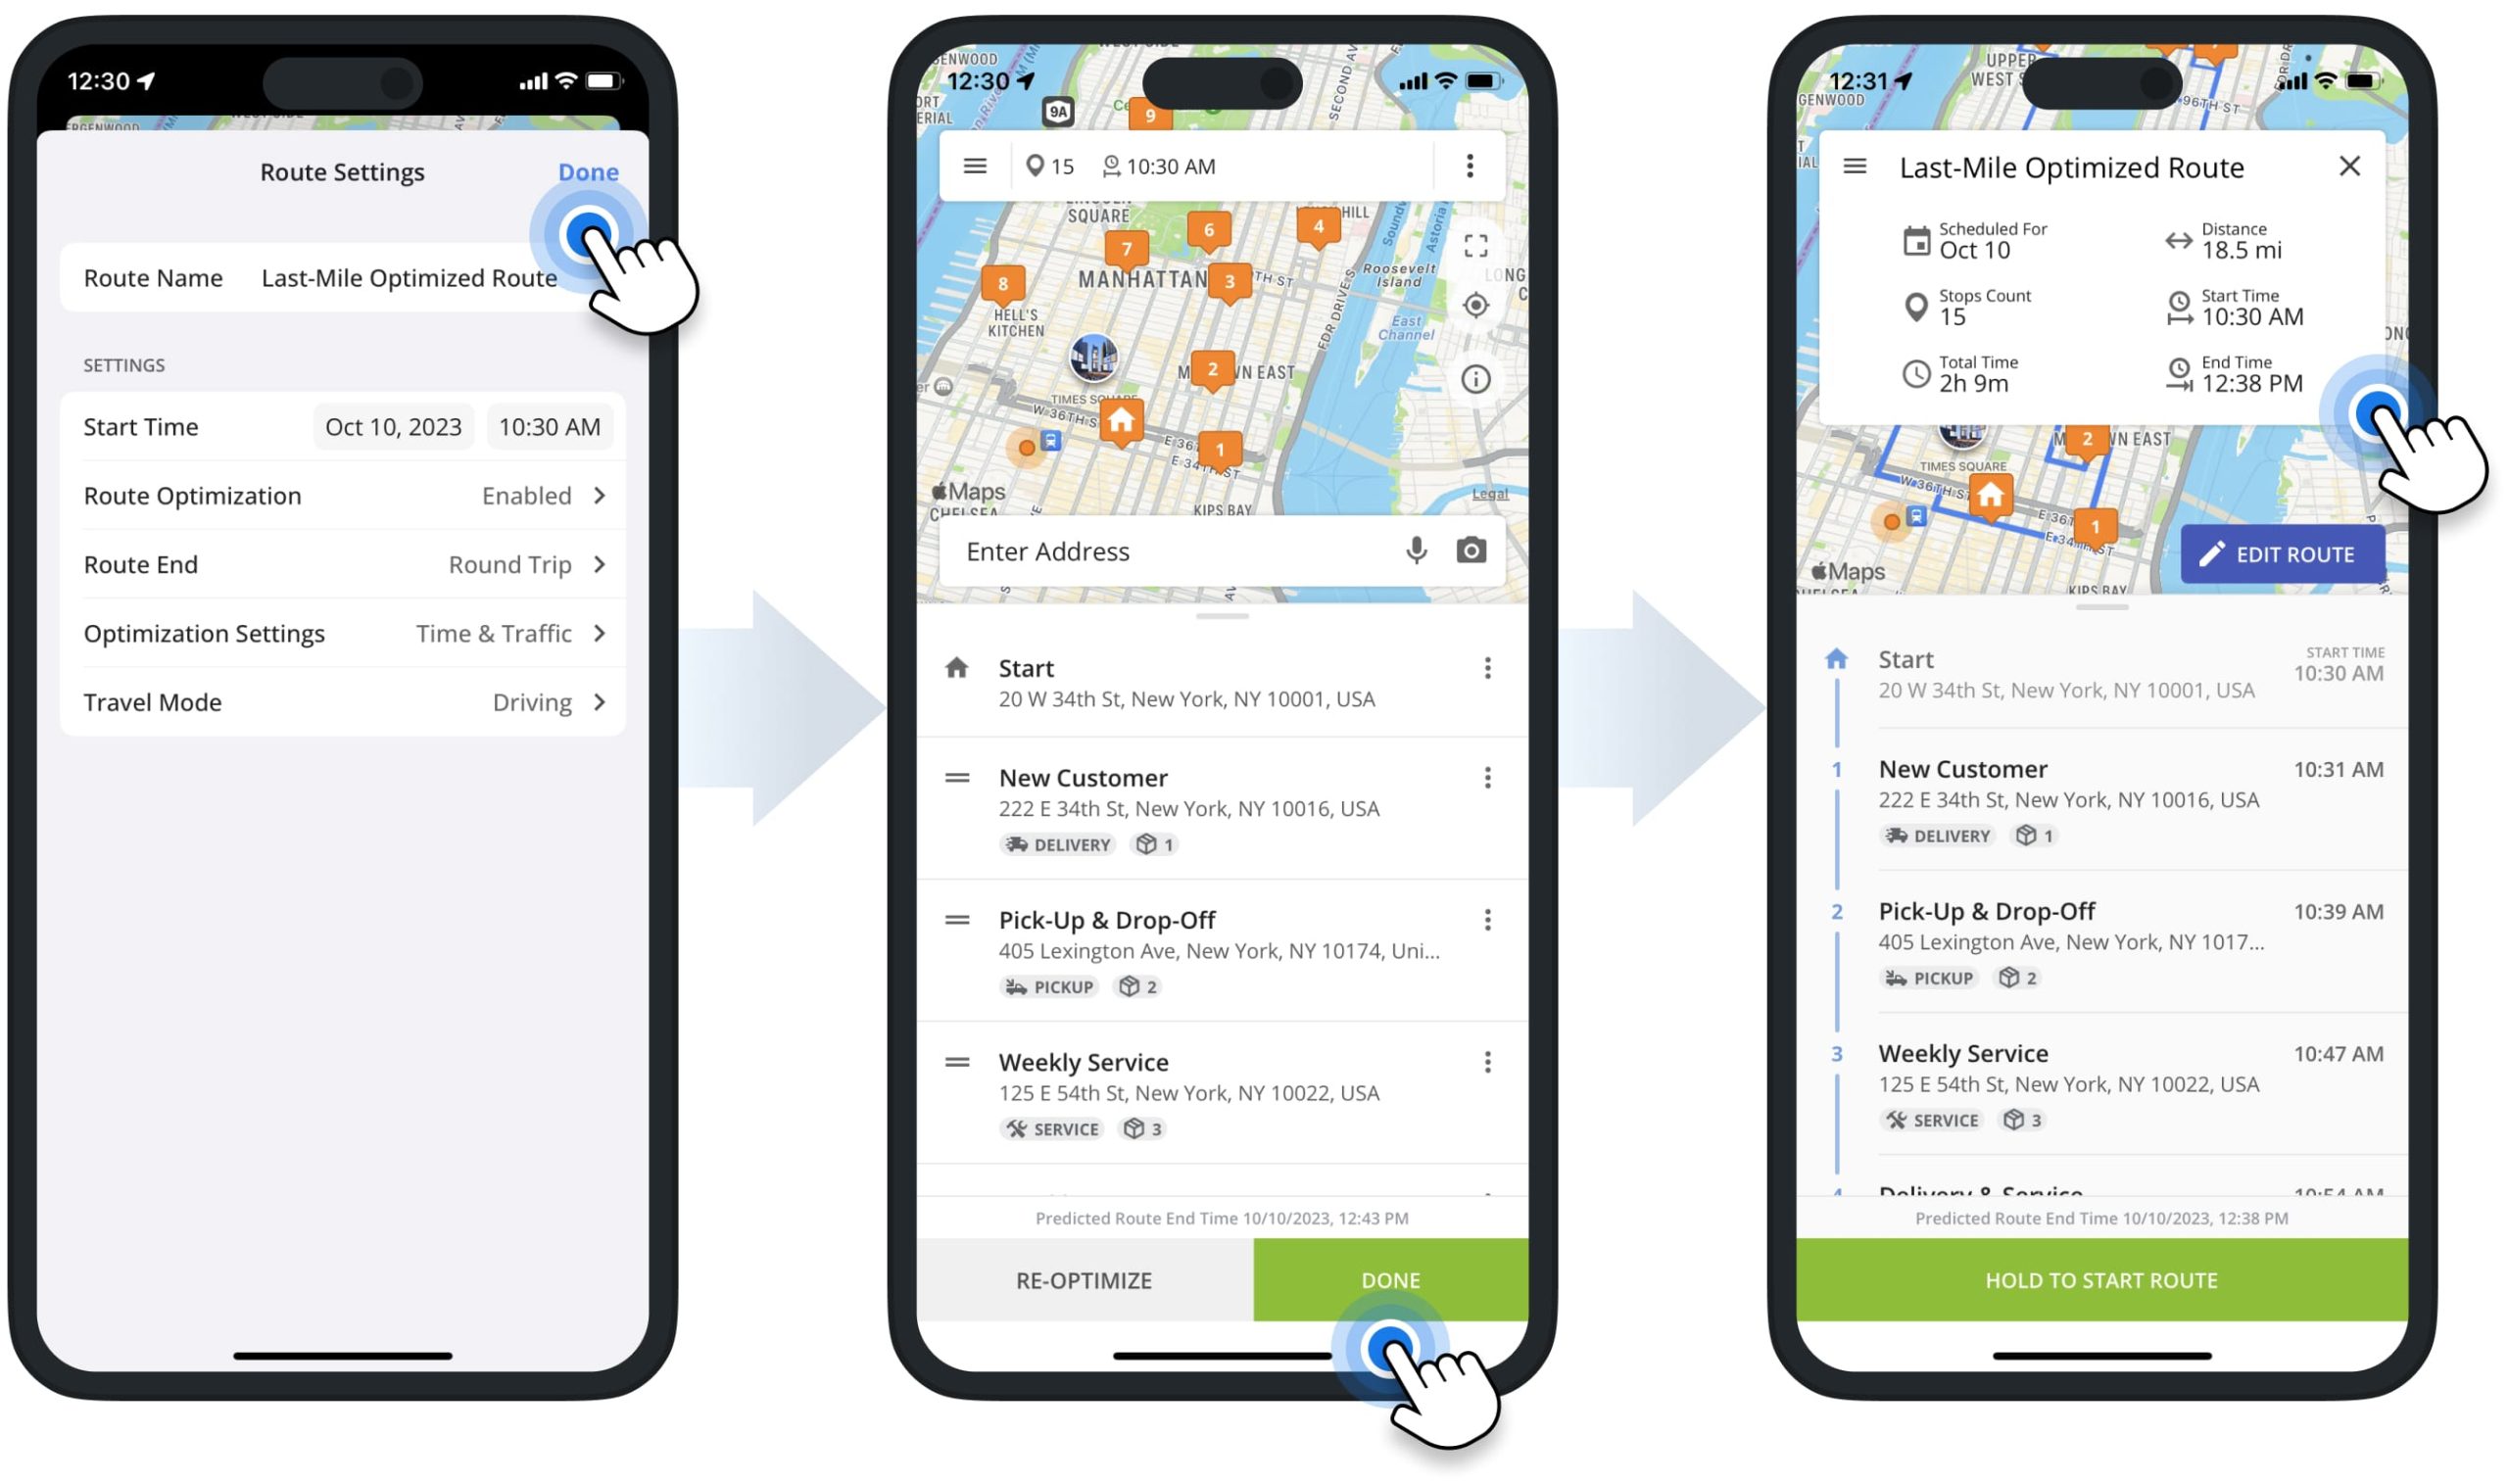 Update route settings, scheduled route start time, travel mode and directions, and other route parameters using Route4Me's iOS Multi-Address Route Optimization App.